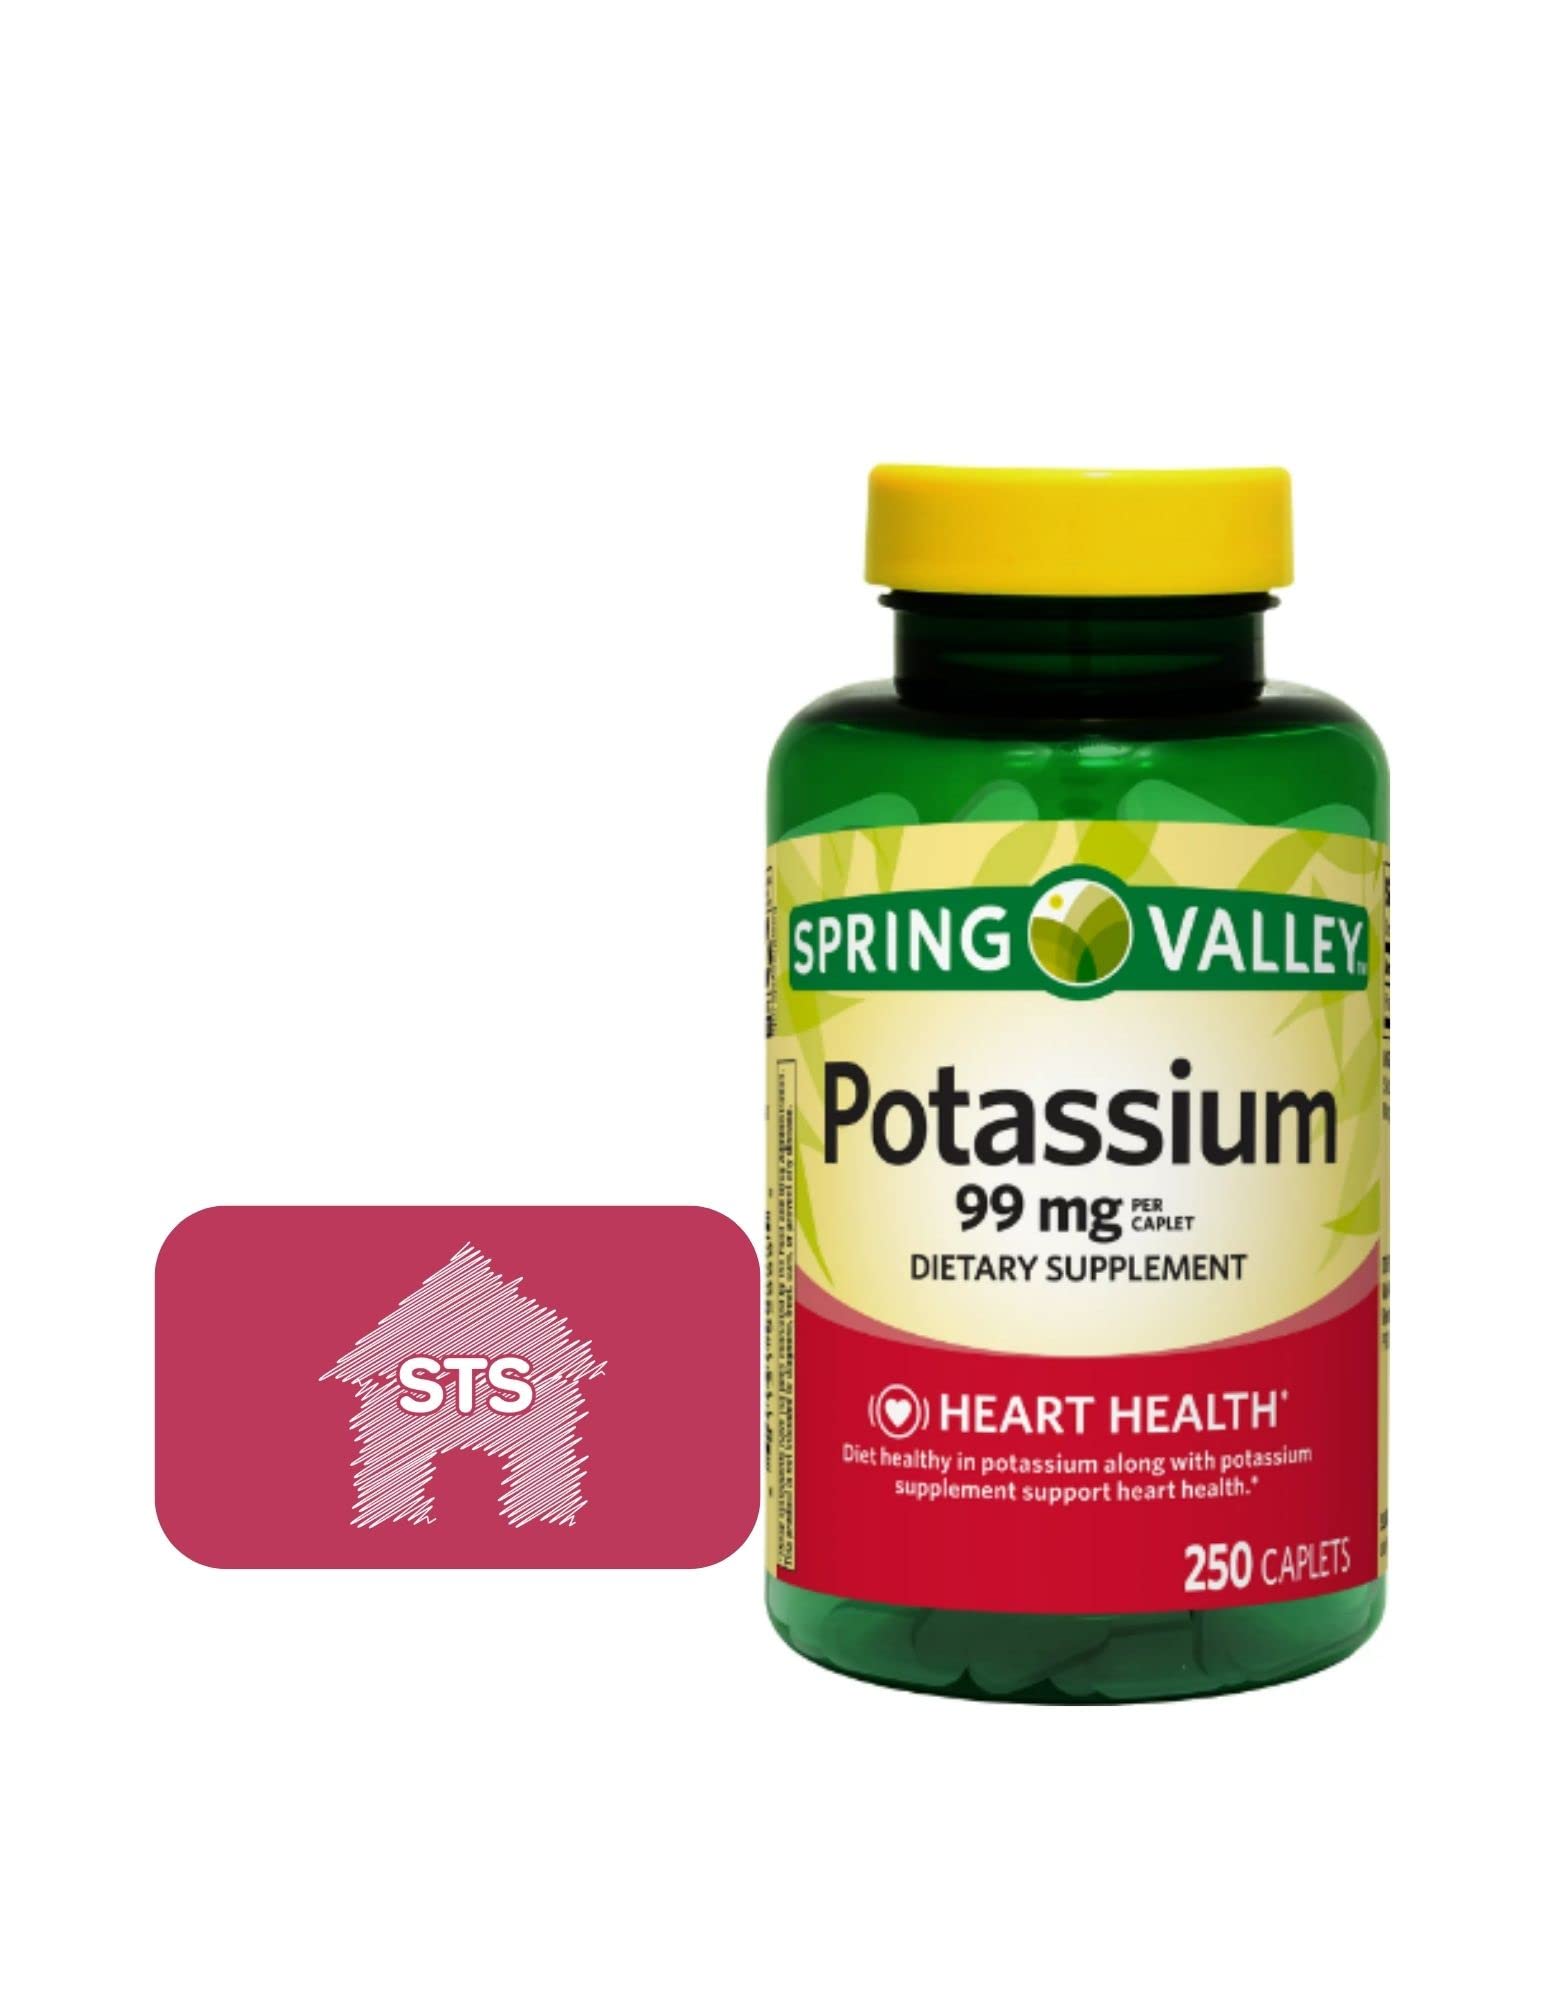 Spring Valley Potassium 99 mg, Caplets for Heart, Nerve & Muscle Function, 250 Count + STS Home Fridge Magnet